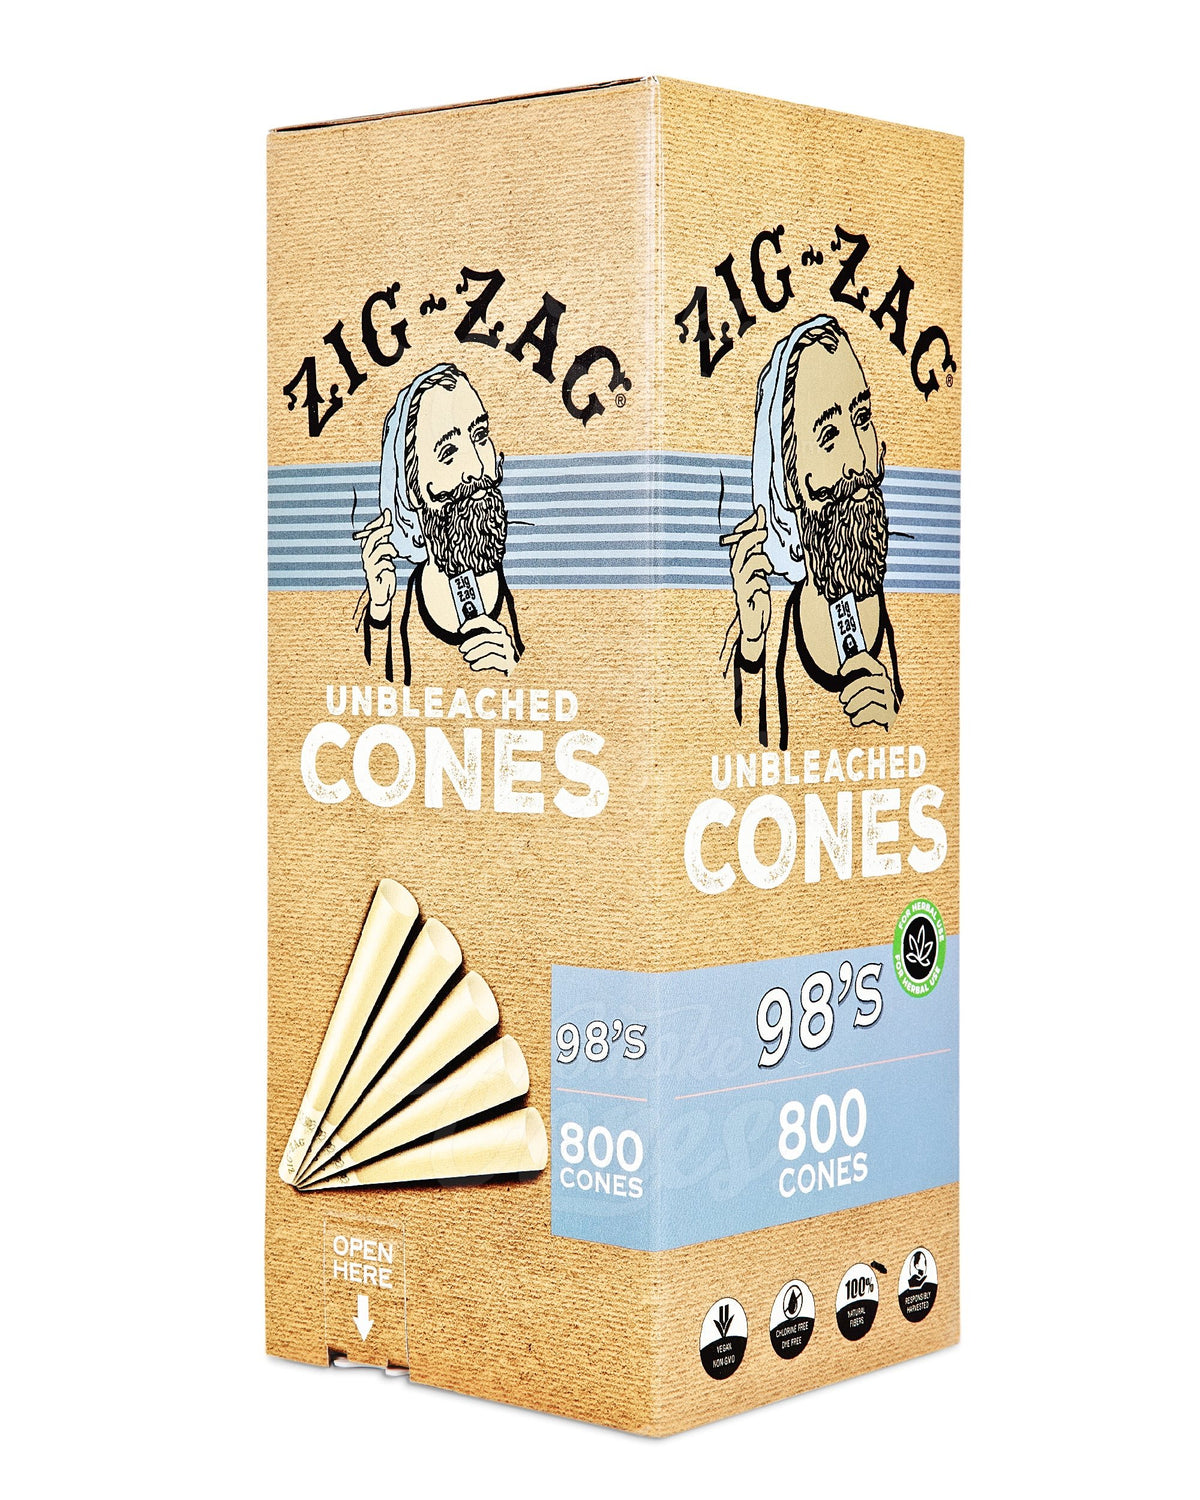 Zig Zag 98mm 98 Special Sized Pre Rolled Unbleached Paper Cones 800/Box - 1